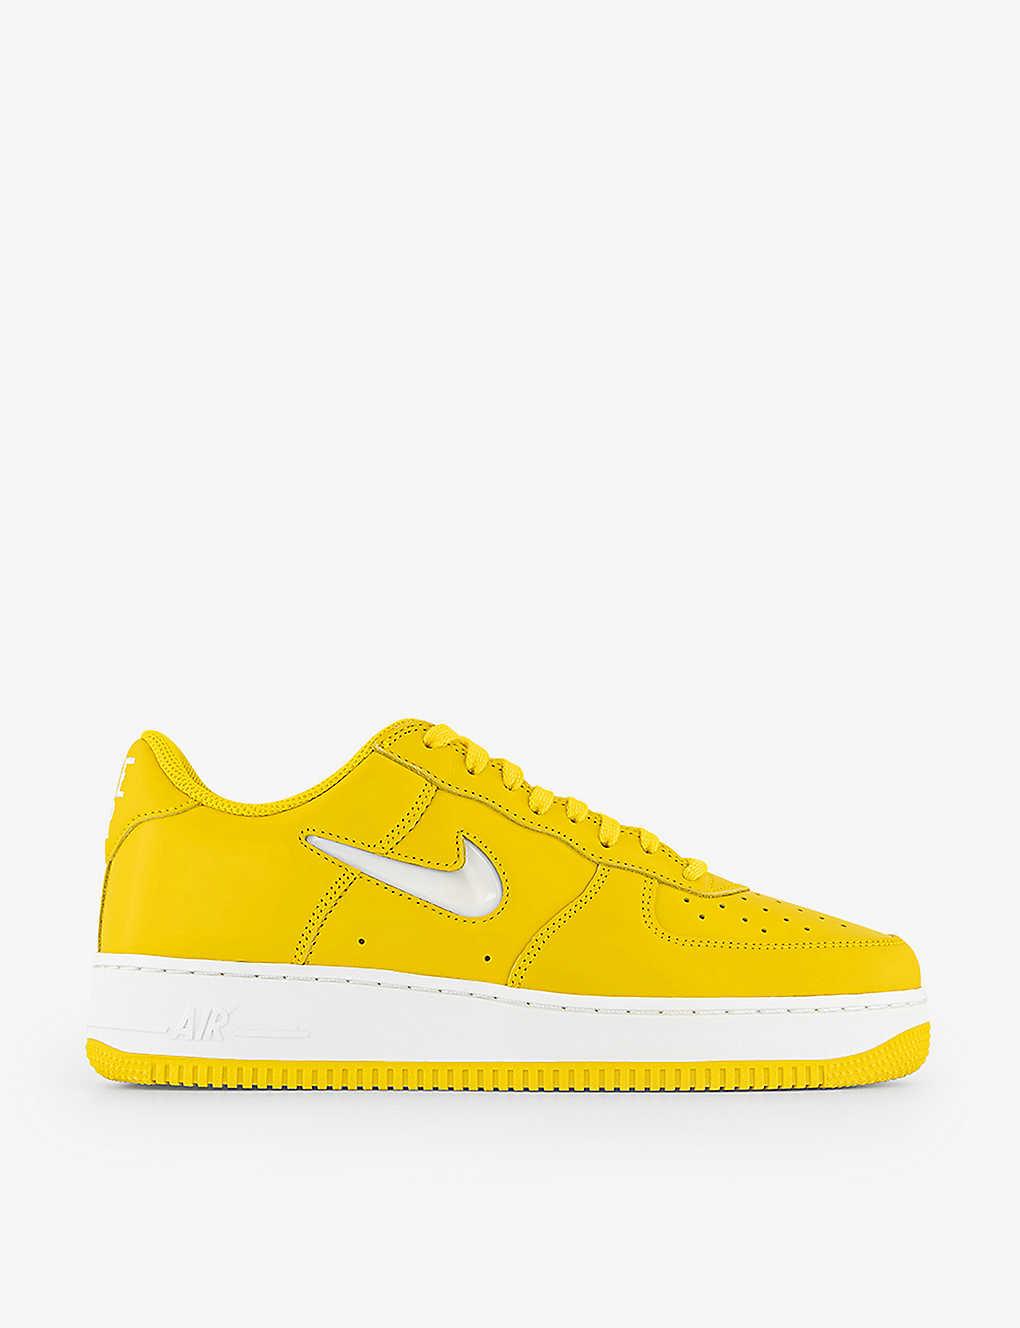 avond Boek fusie Nike Air Force 1 '07 Leather Low-top Trainers in Yellow for Men | Lyst